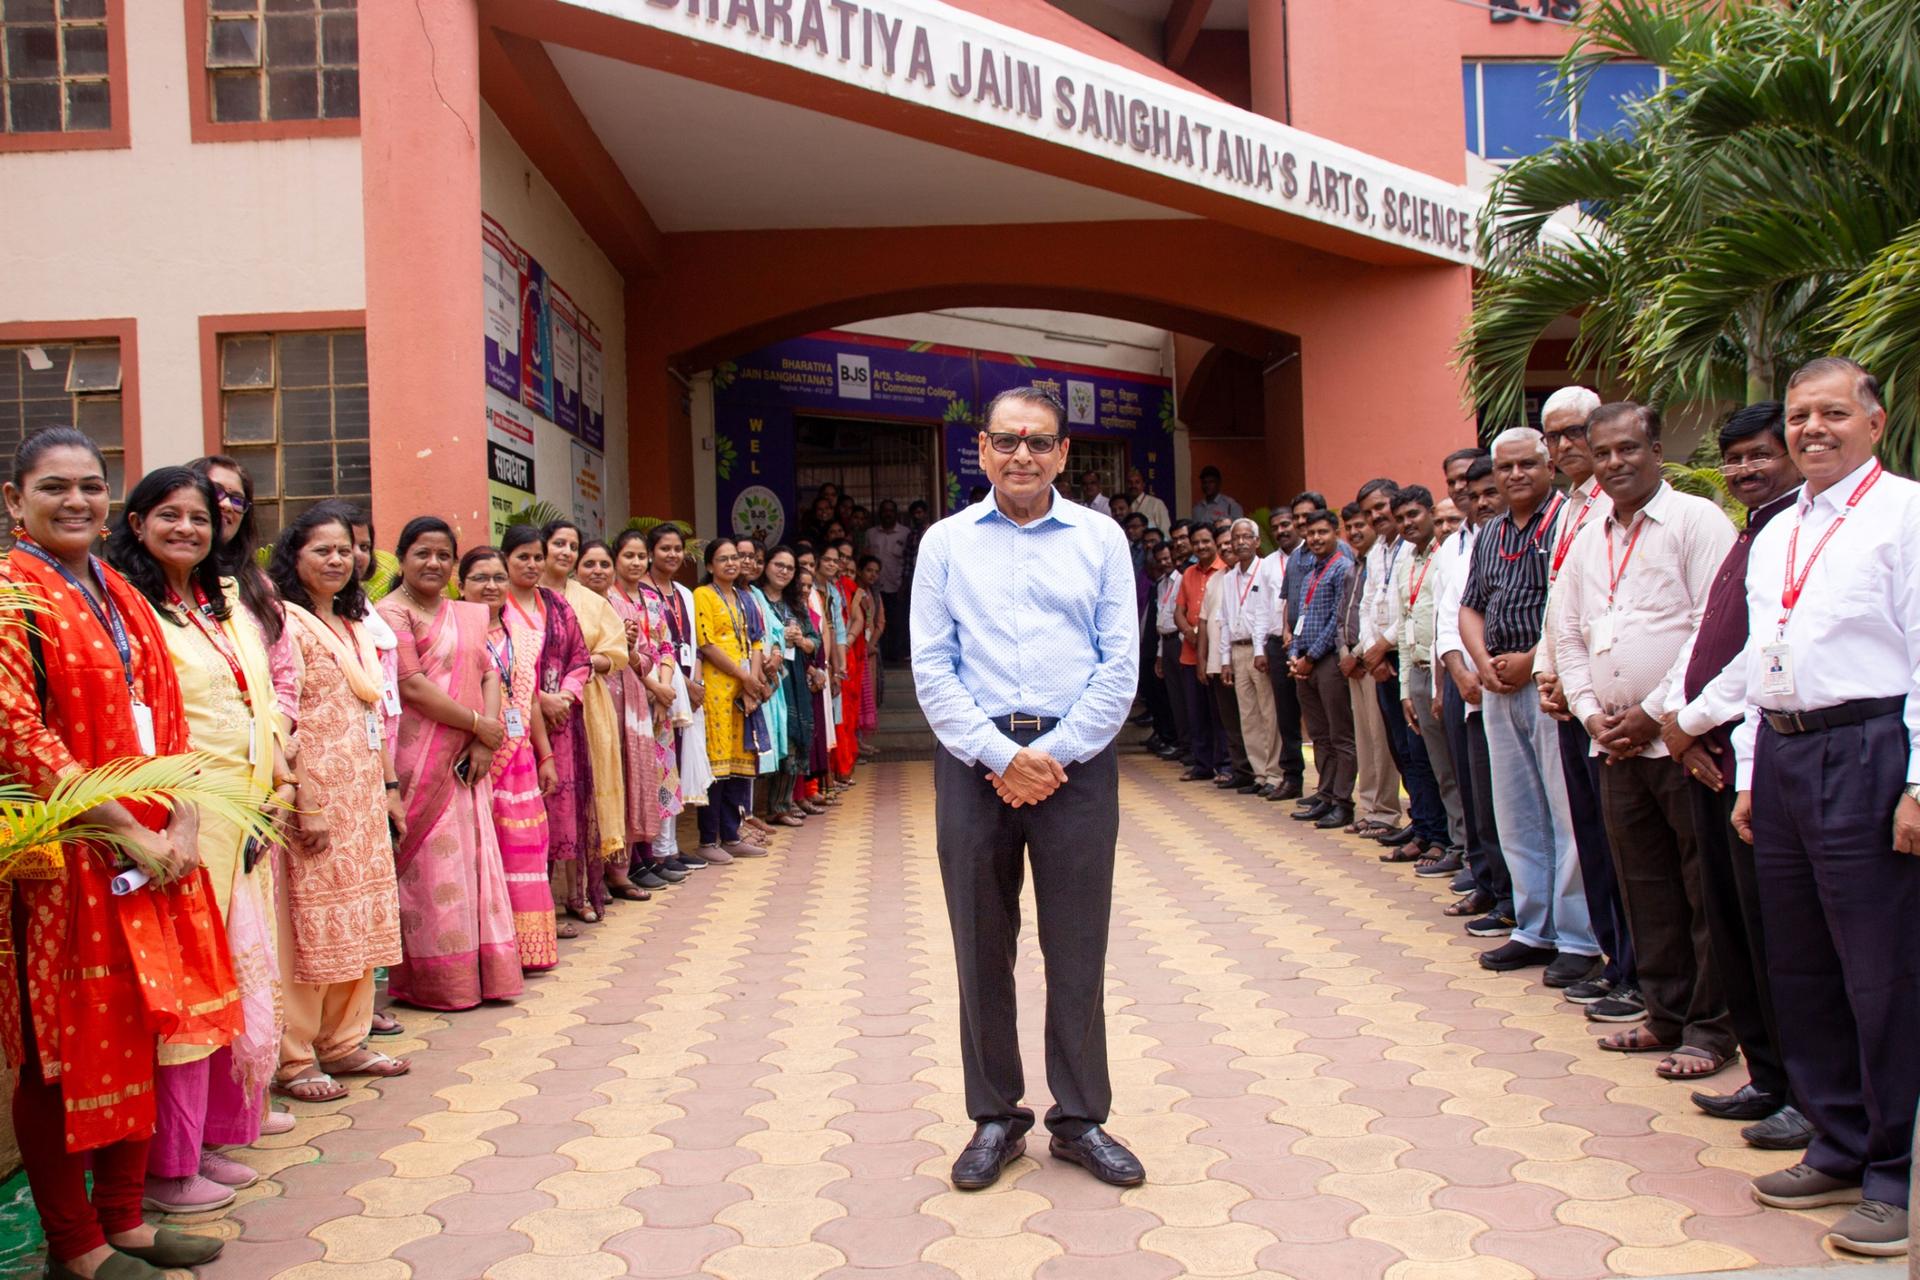 Shantilal Muttha, founder of Bharatiya Jain Sanghatana, stands in front of the school with teachers and staff. 